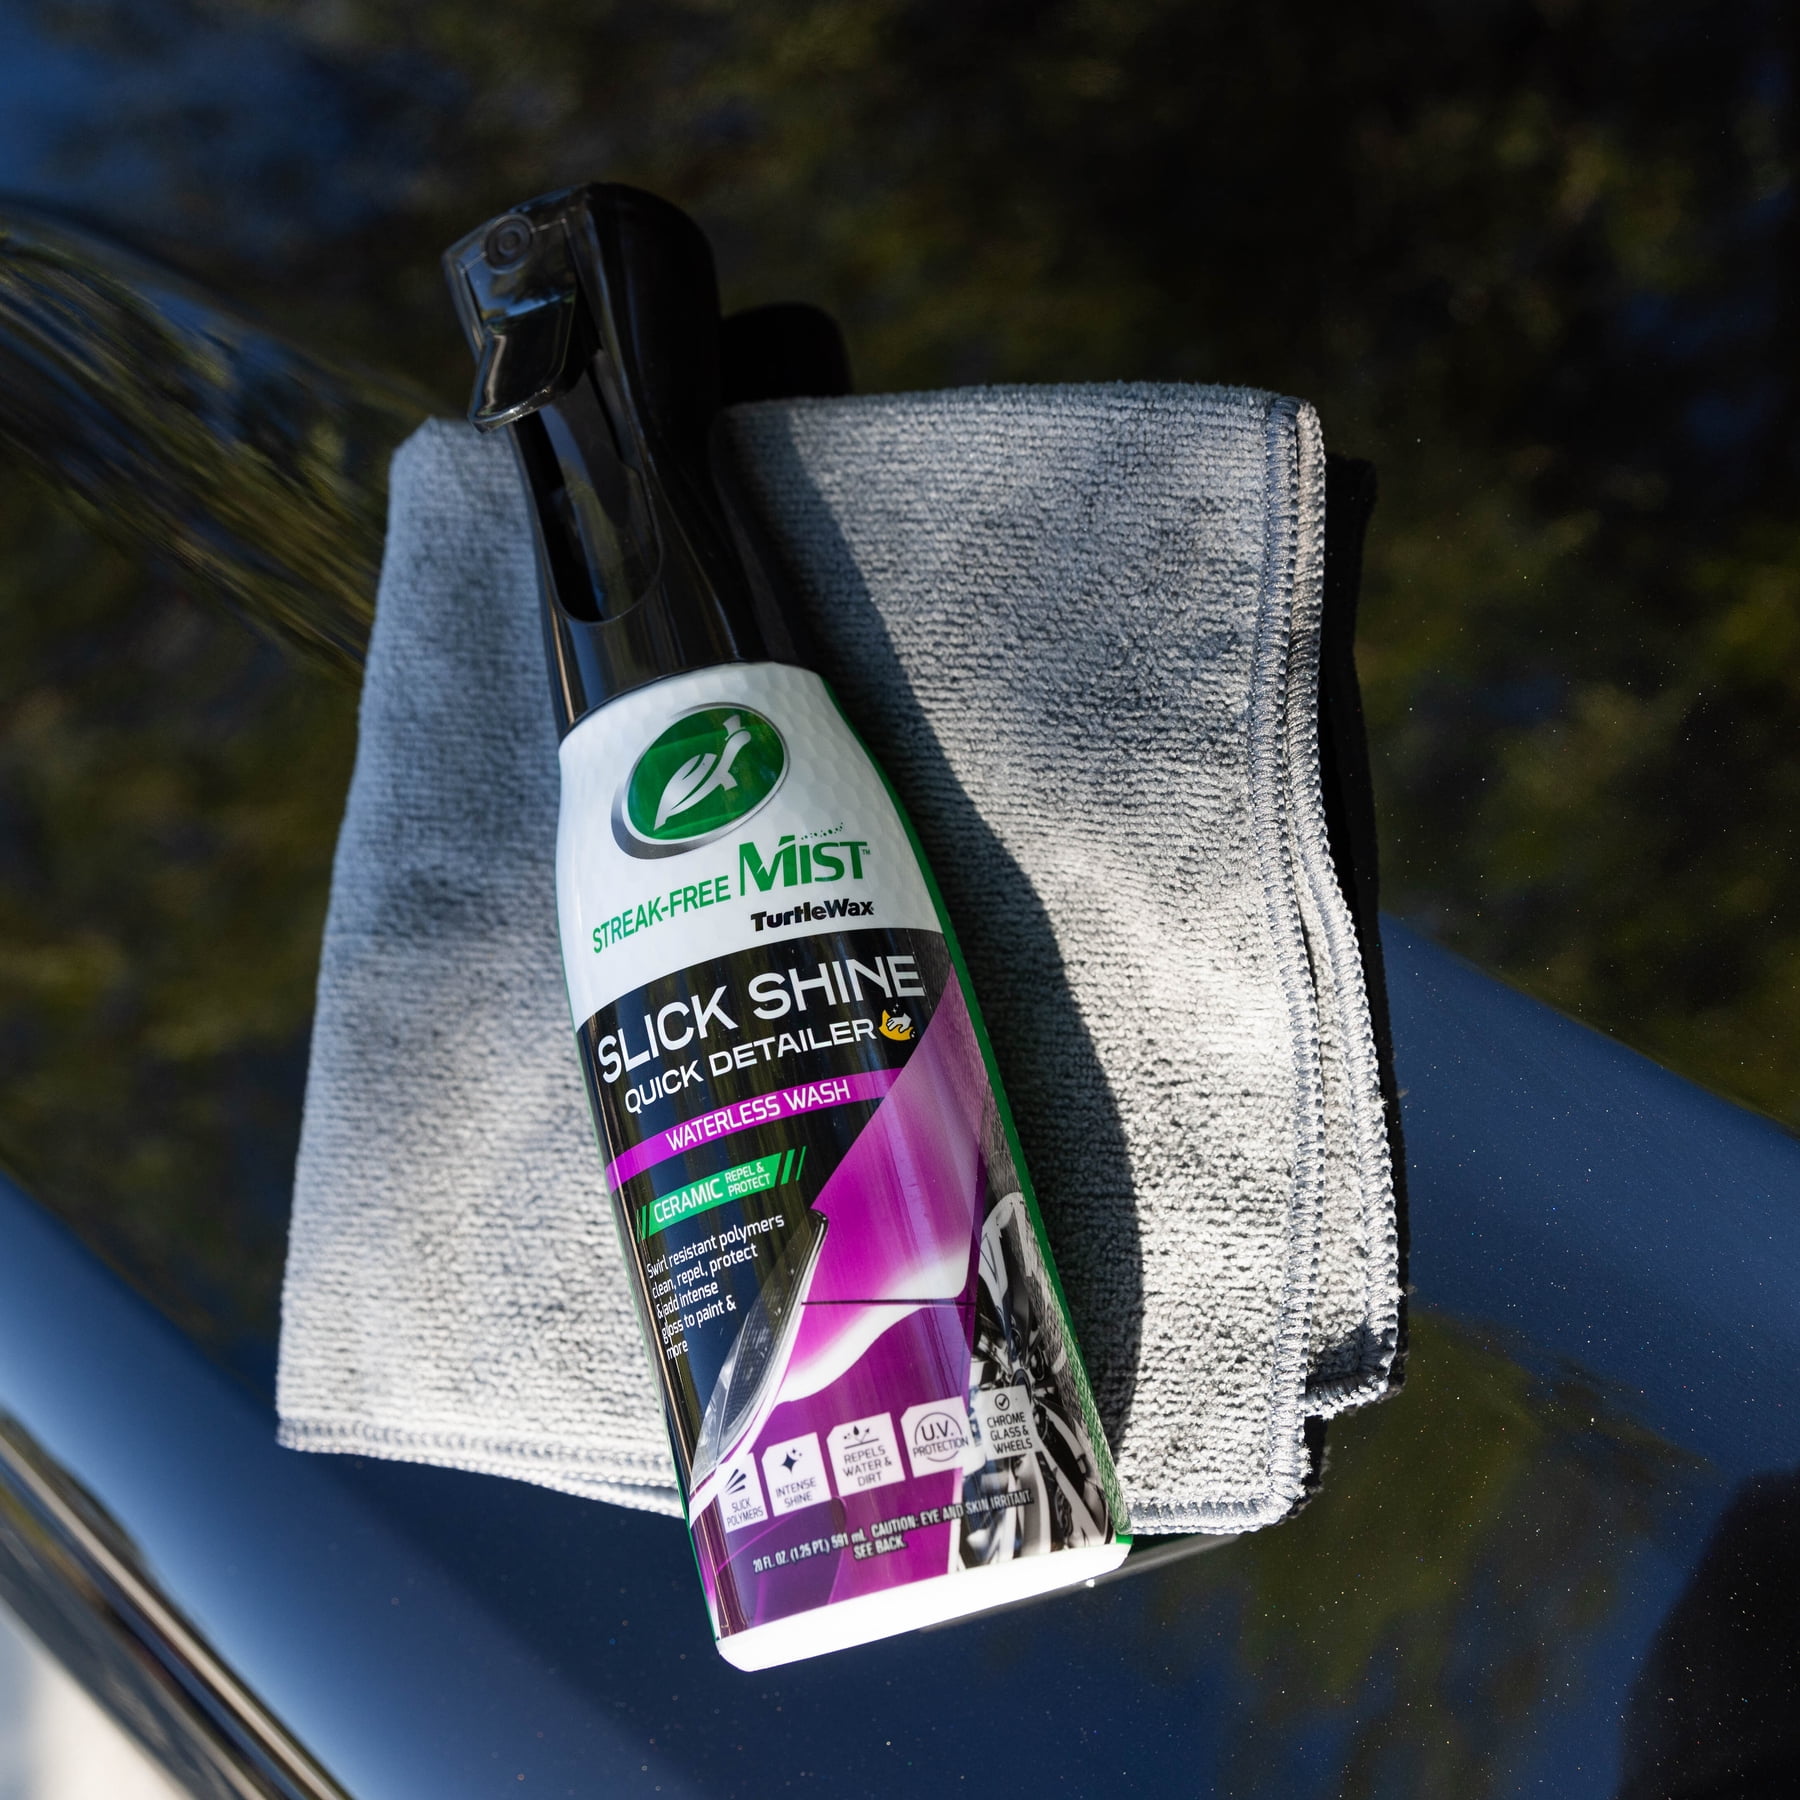 Slick Products SP4005 High Gloss Finish Instant Detailer